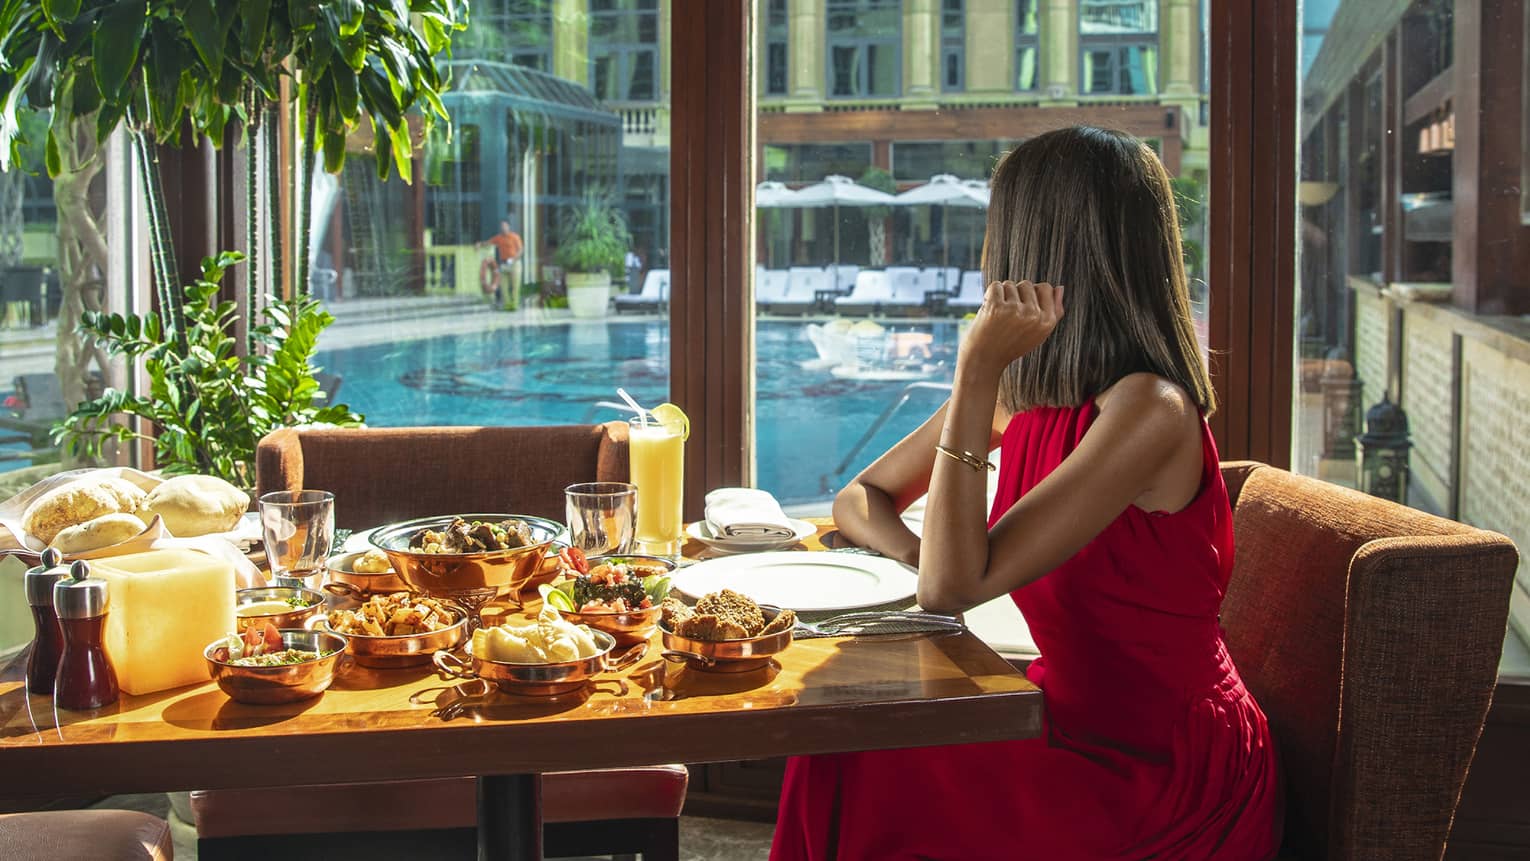 A woman in a long red dress sits at a table with a variety of food next to a long window overlooking a pool